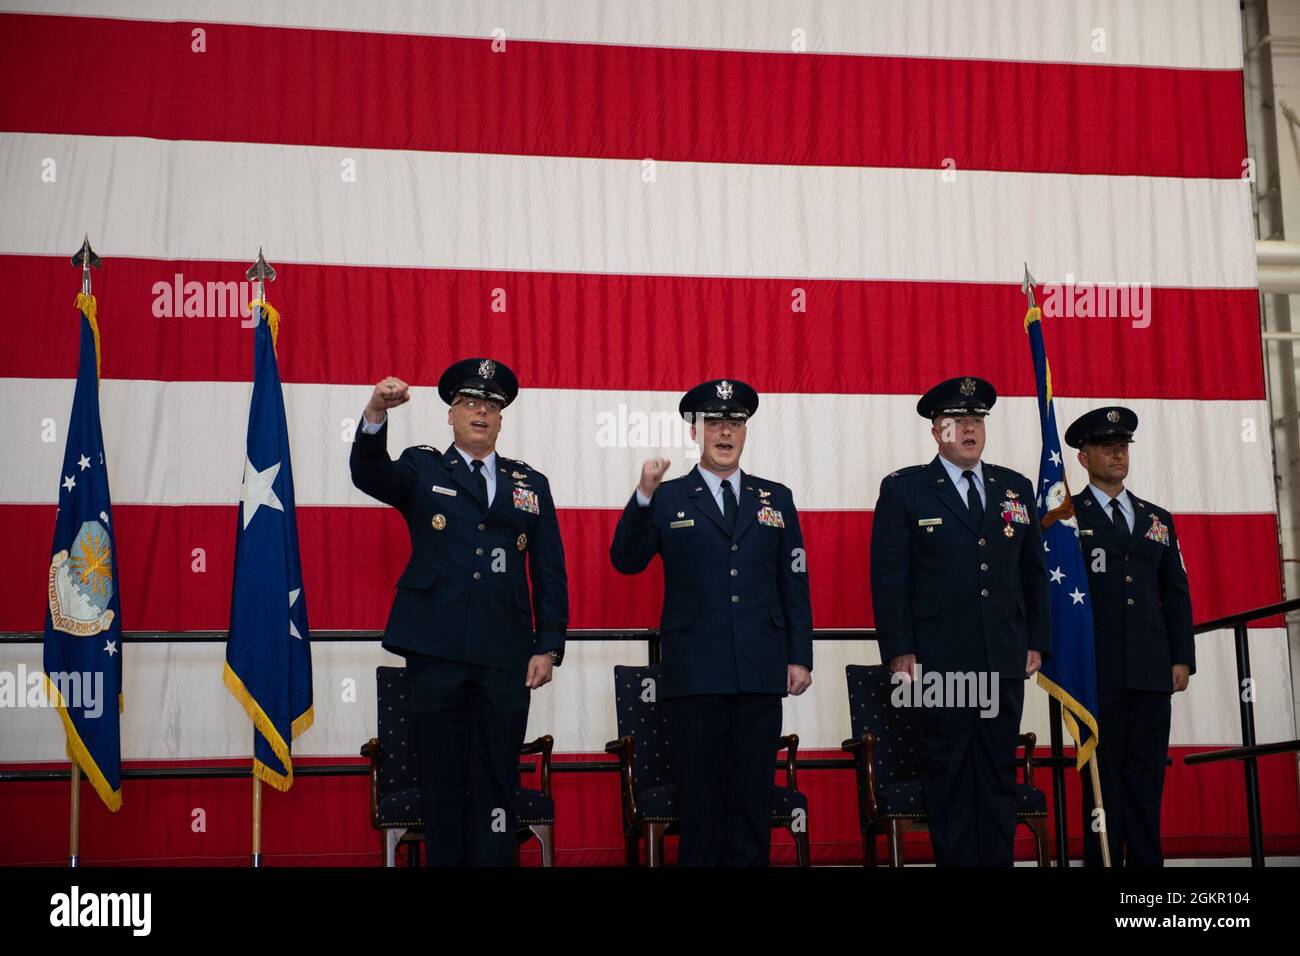 U.S. Air Force Maj. Gen. Mark Weatherington, Eighth Air Force and Joint-Global Strike Operations Center commander, officiates the 509th Bomb Wing change of command ceremony, Whiteman Air Force Base, Missouri, June 16, 2021. Military change of command ceremonies are a time honored tradition that symbolizes the continuity of authority as the command passes from one individual to another, and is symbolized by the handing the unit flag from the outgoing commander to the new. During the ceremony, Weatherington passed the unit flag from Col. Jeffrey Schreiner to Col. Daniel Diehl. Stock Photo